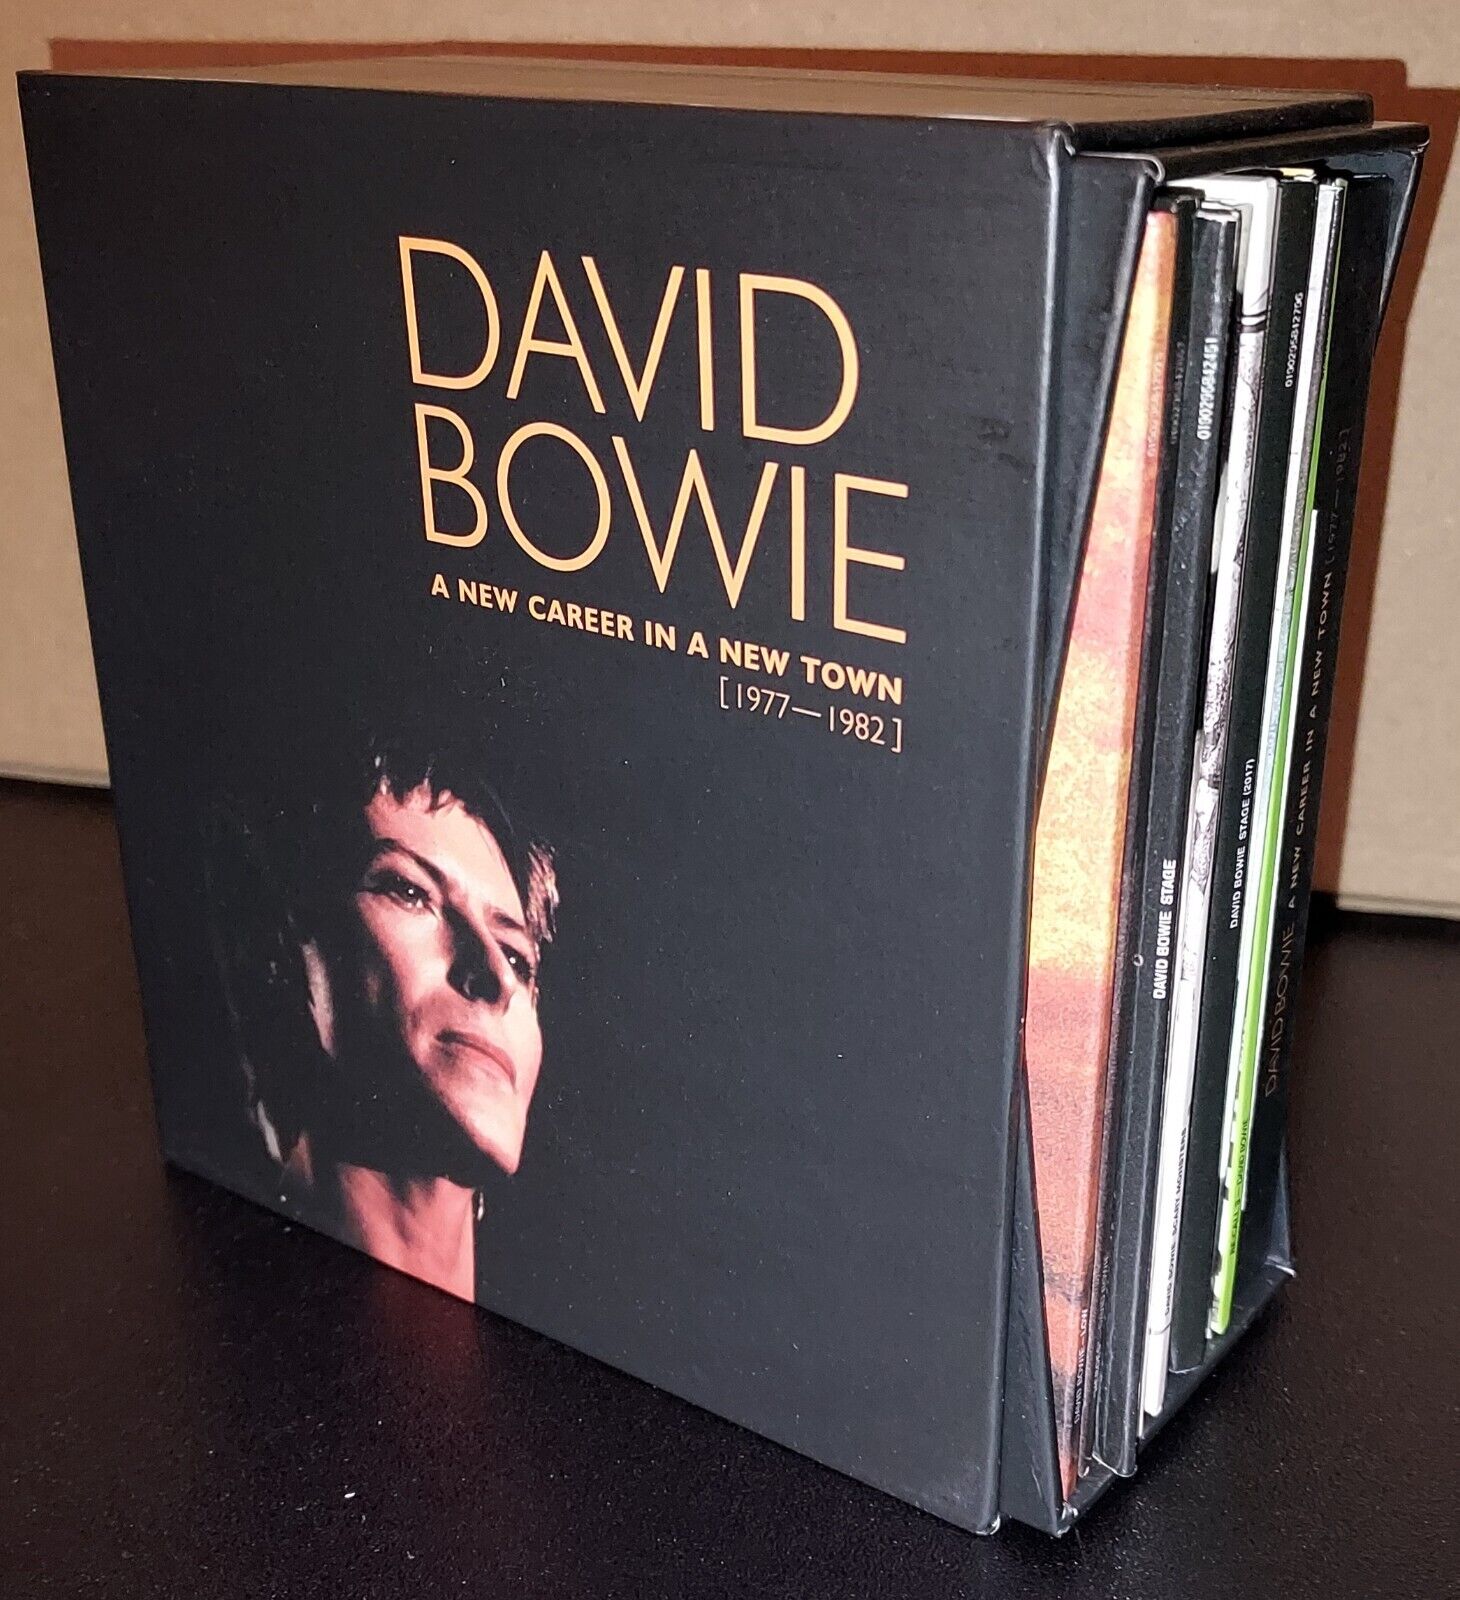 DAVID BOWIE A New Career in a New Town 1977-1982 11 CD BOX SET SeeDescript Ex+